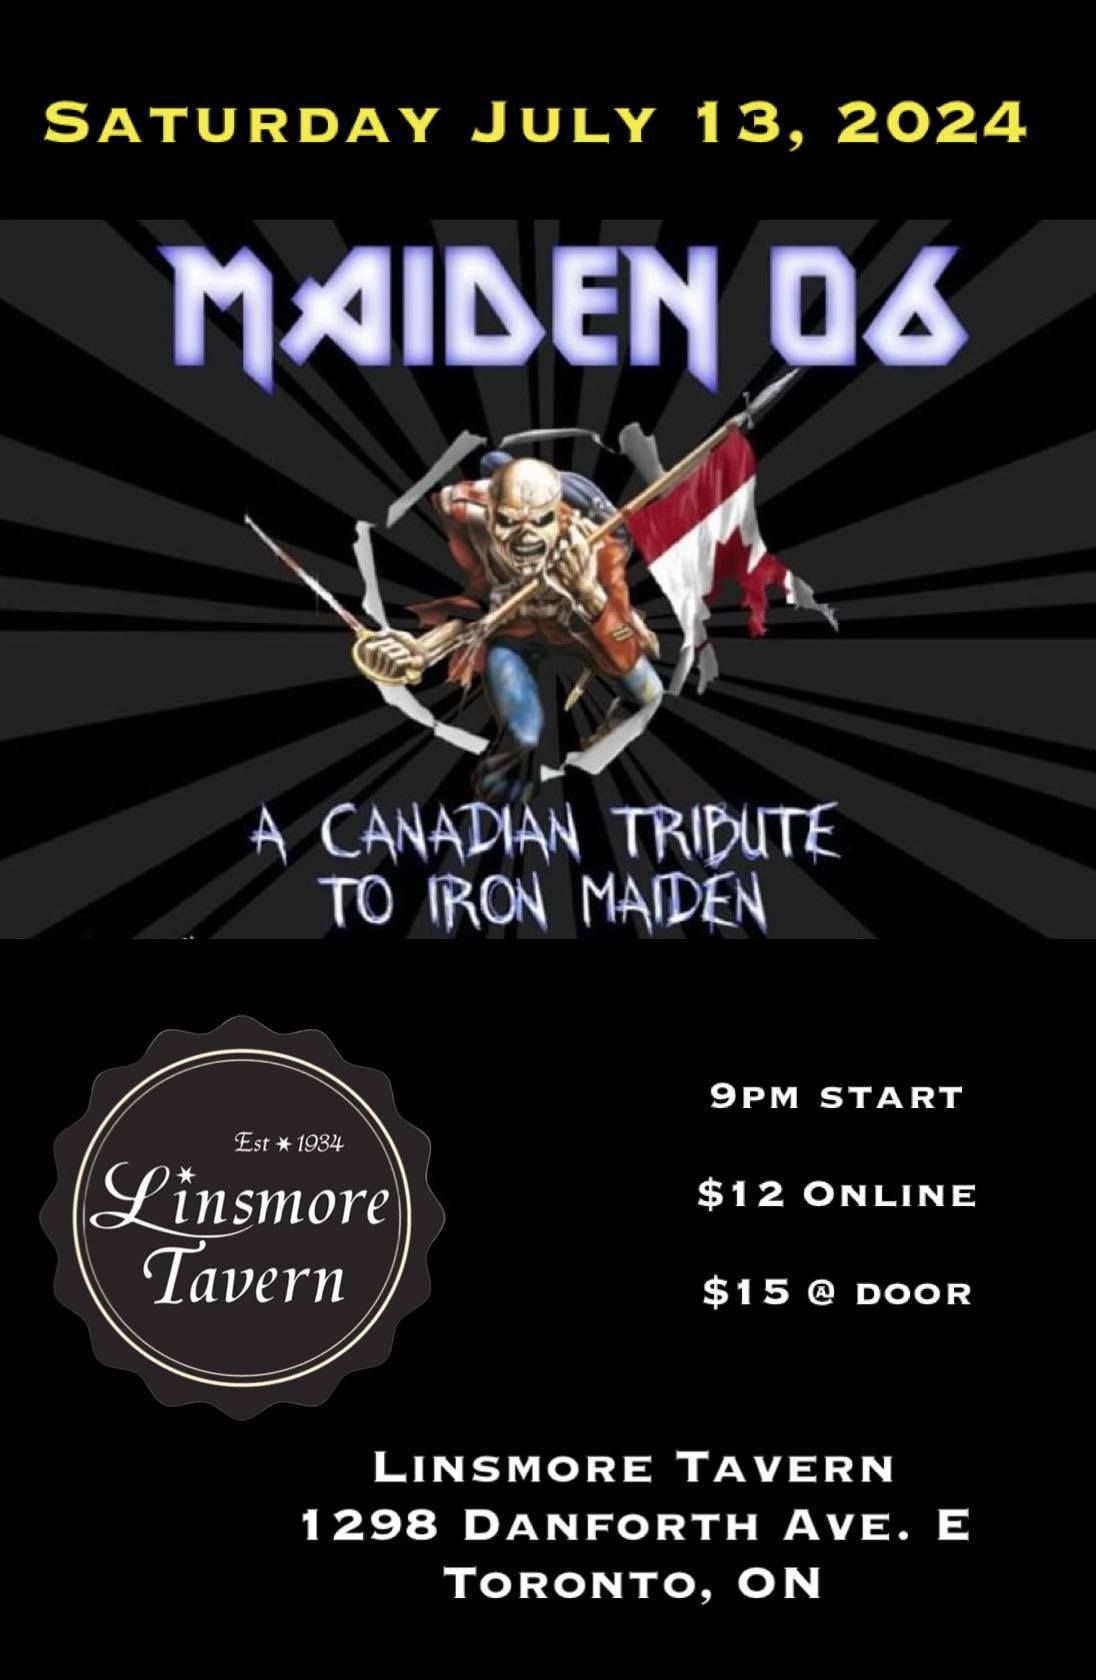 Maiden 06 A Canadian Iron Maiden Tribute Live at the Linsmore Tavern!